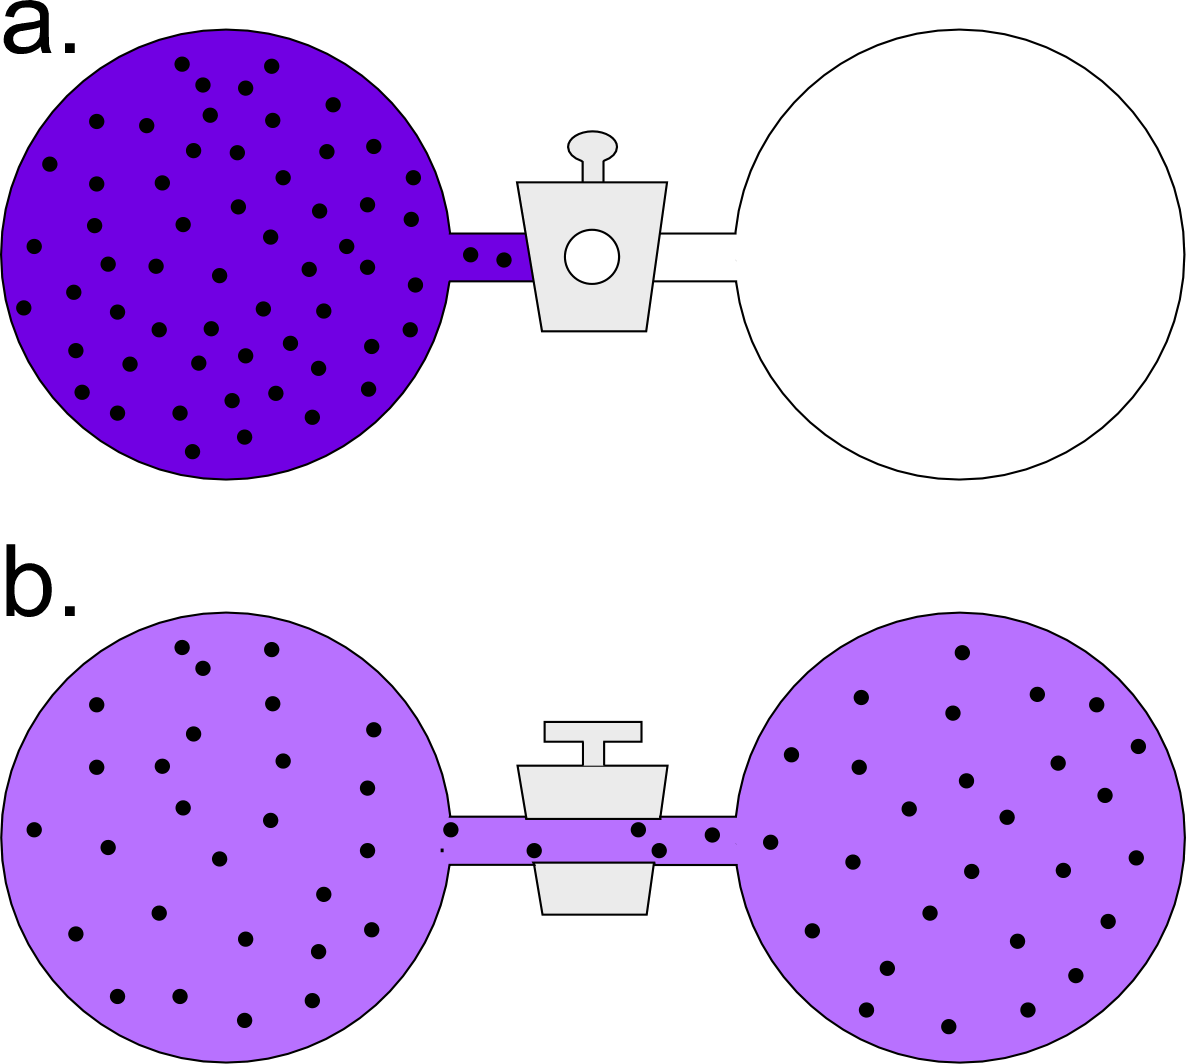 The expansion of a gas into a larger available volume occurs spontaneously